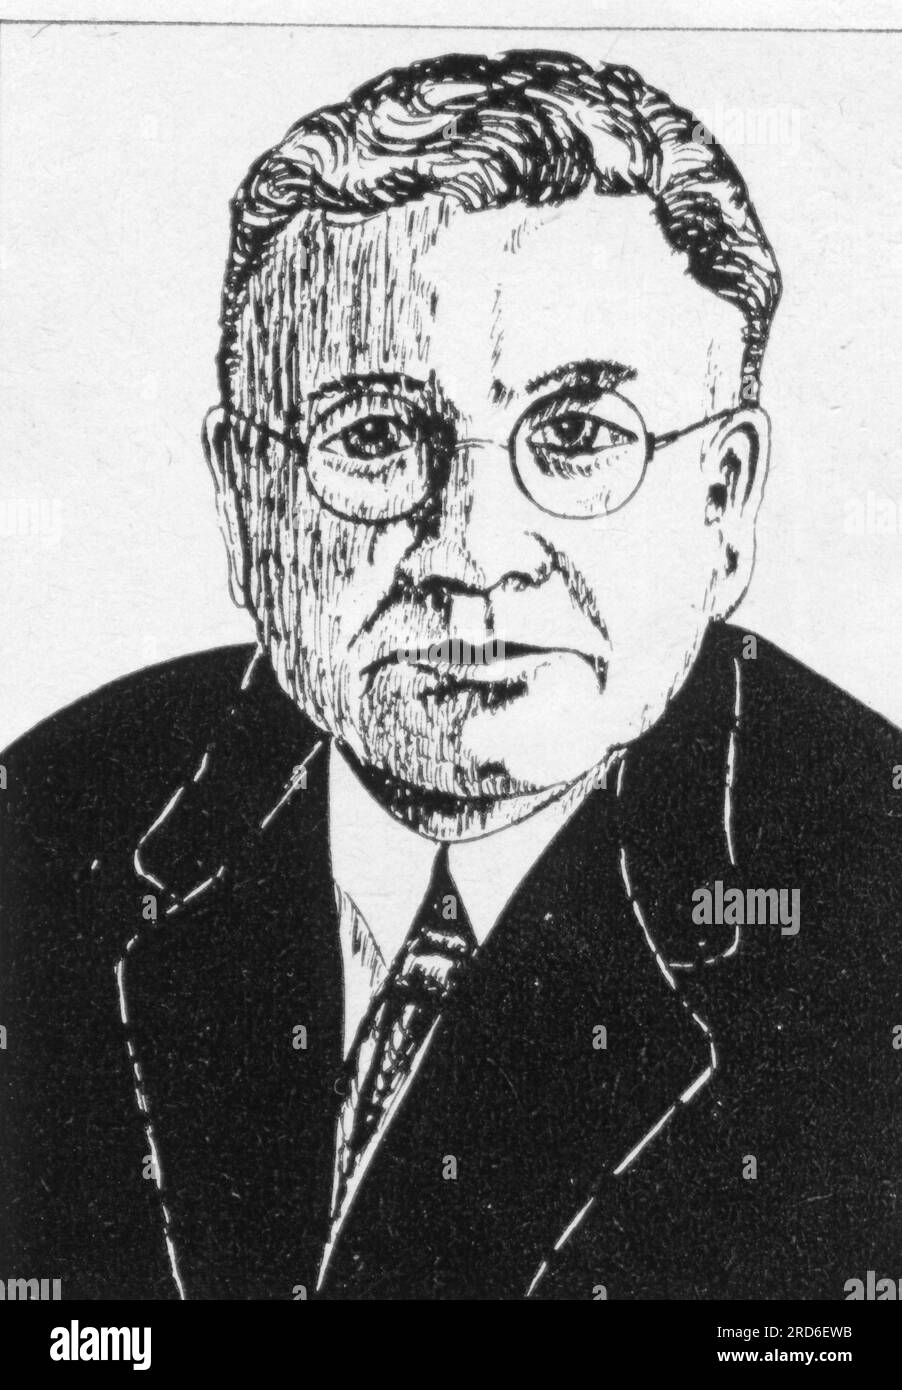 Wuertz, Hans, 18.5.1875 - 13.7.1958, German pedagogue, drawing, 2nd half 20th century, ADDITIONAL-RIGHTS-CLEARANCE-INFO-NOT-AVAILABLE Stock Photo